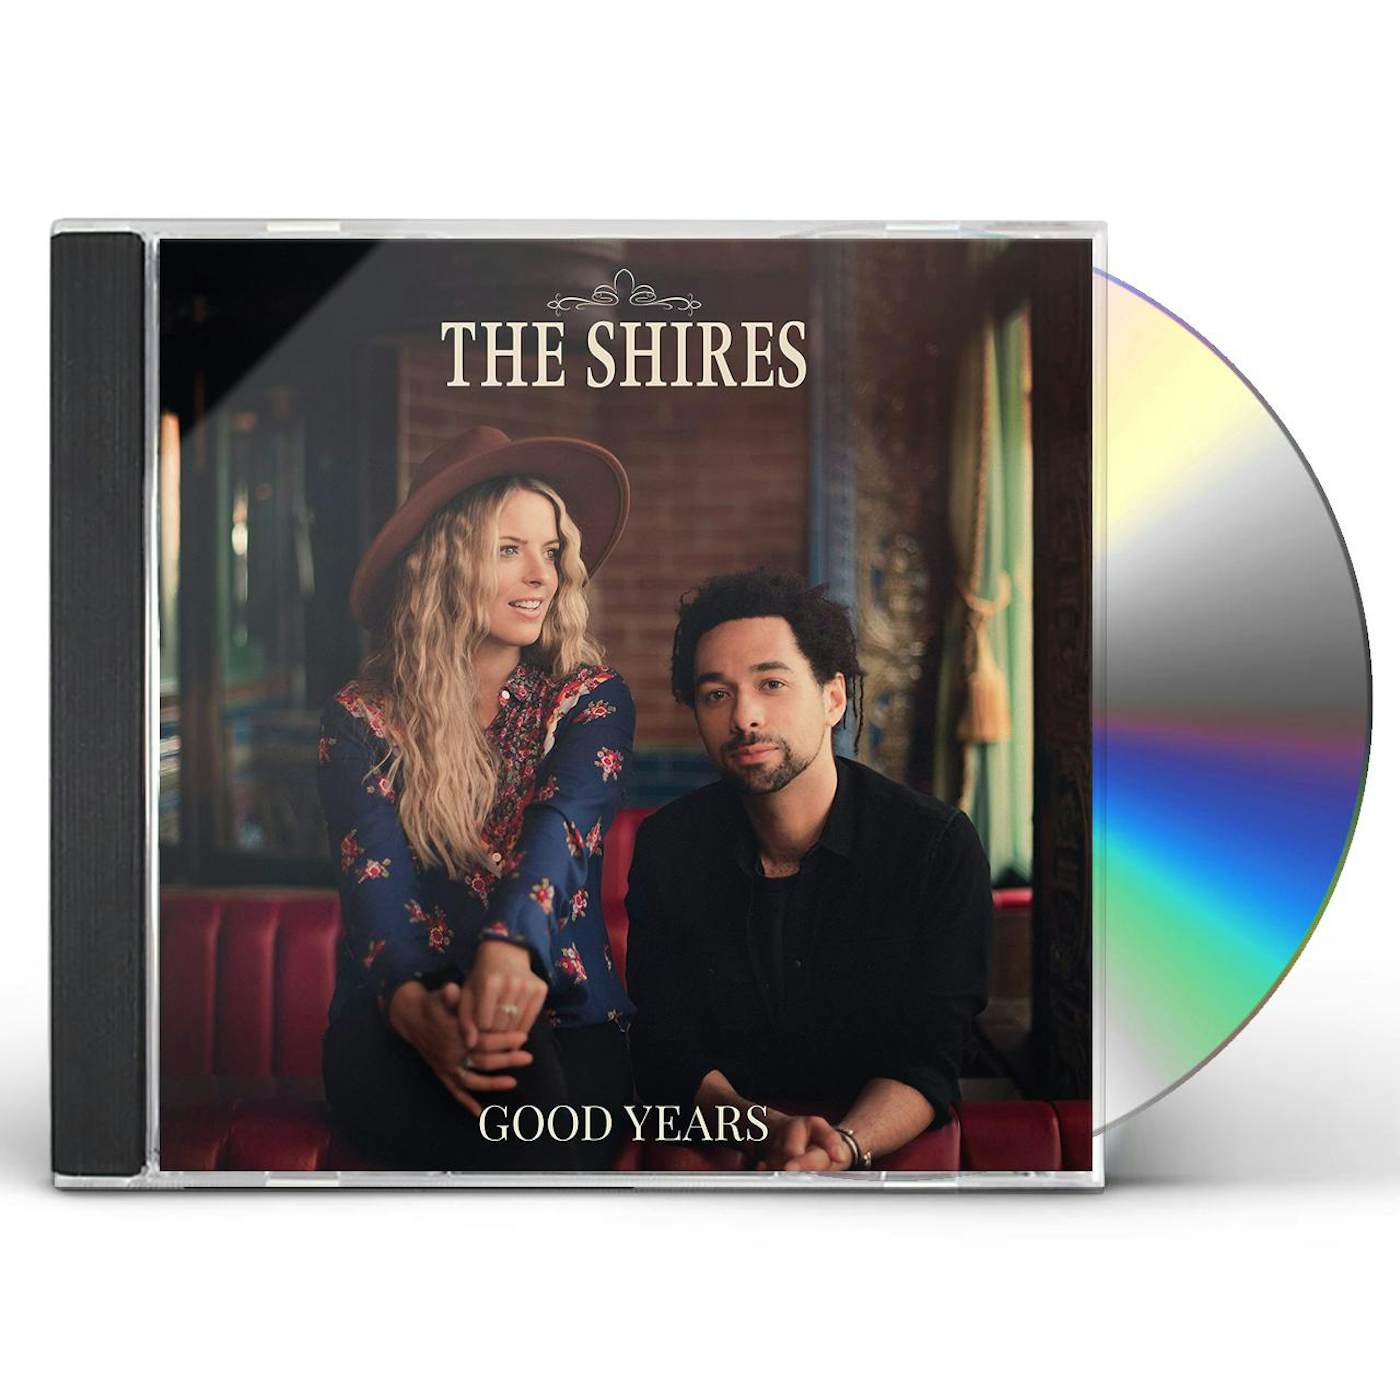 The Shires Good Years CD